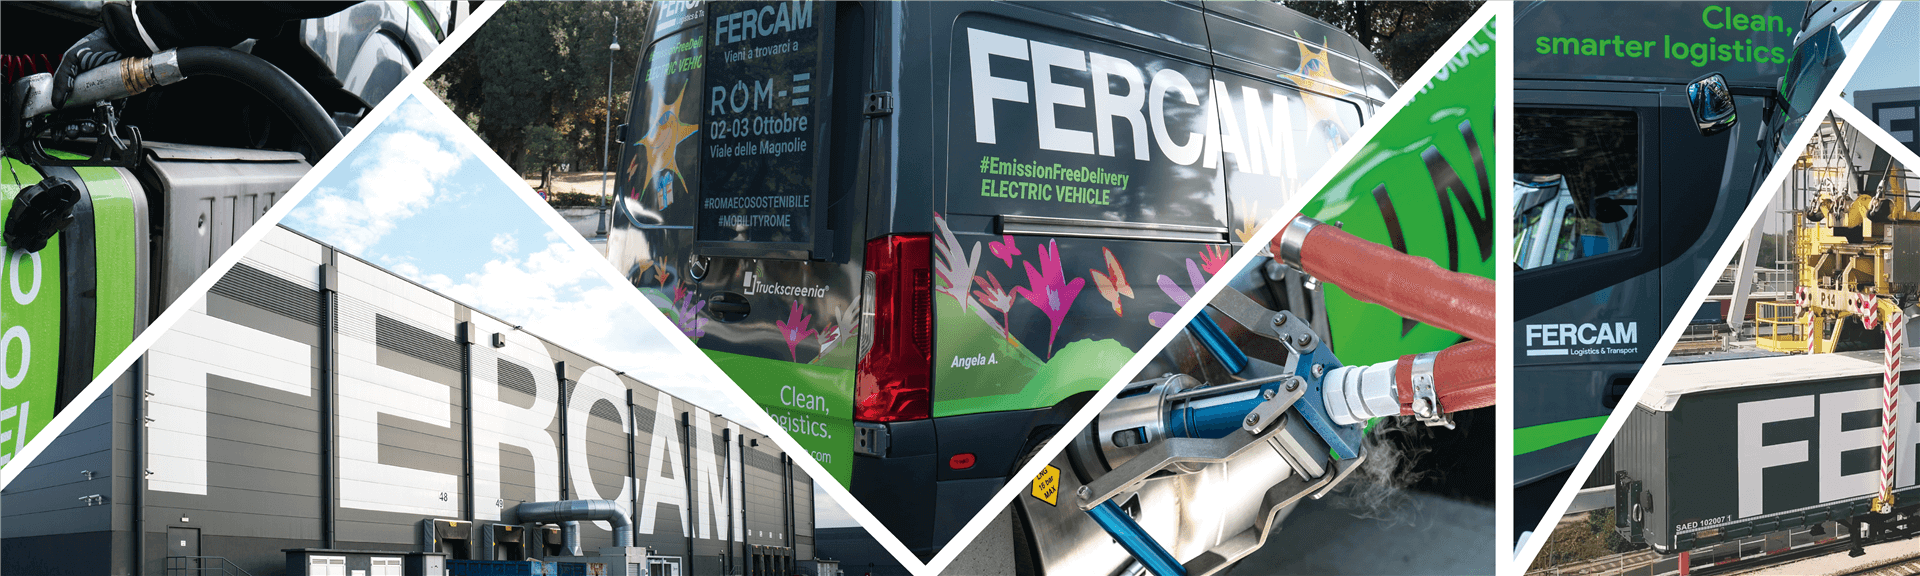 Sustainability: discover the initiatives - FERCAM